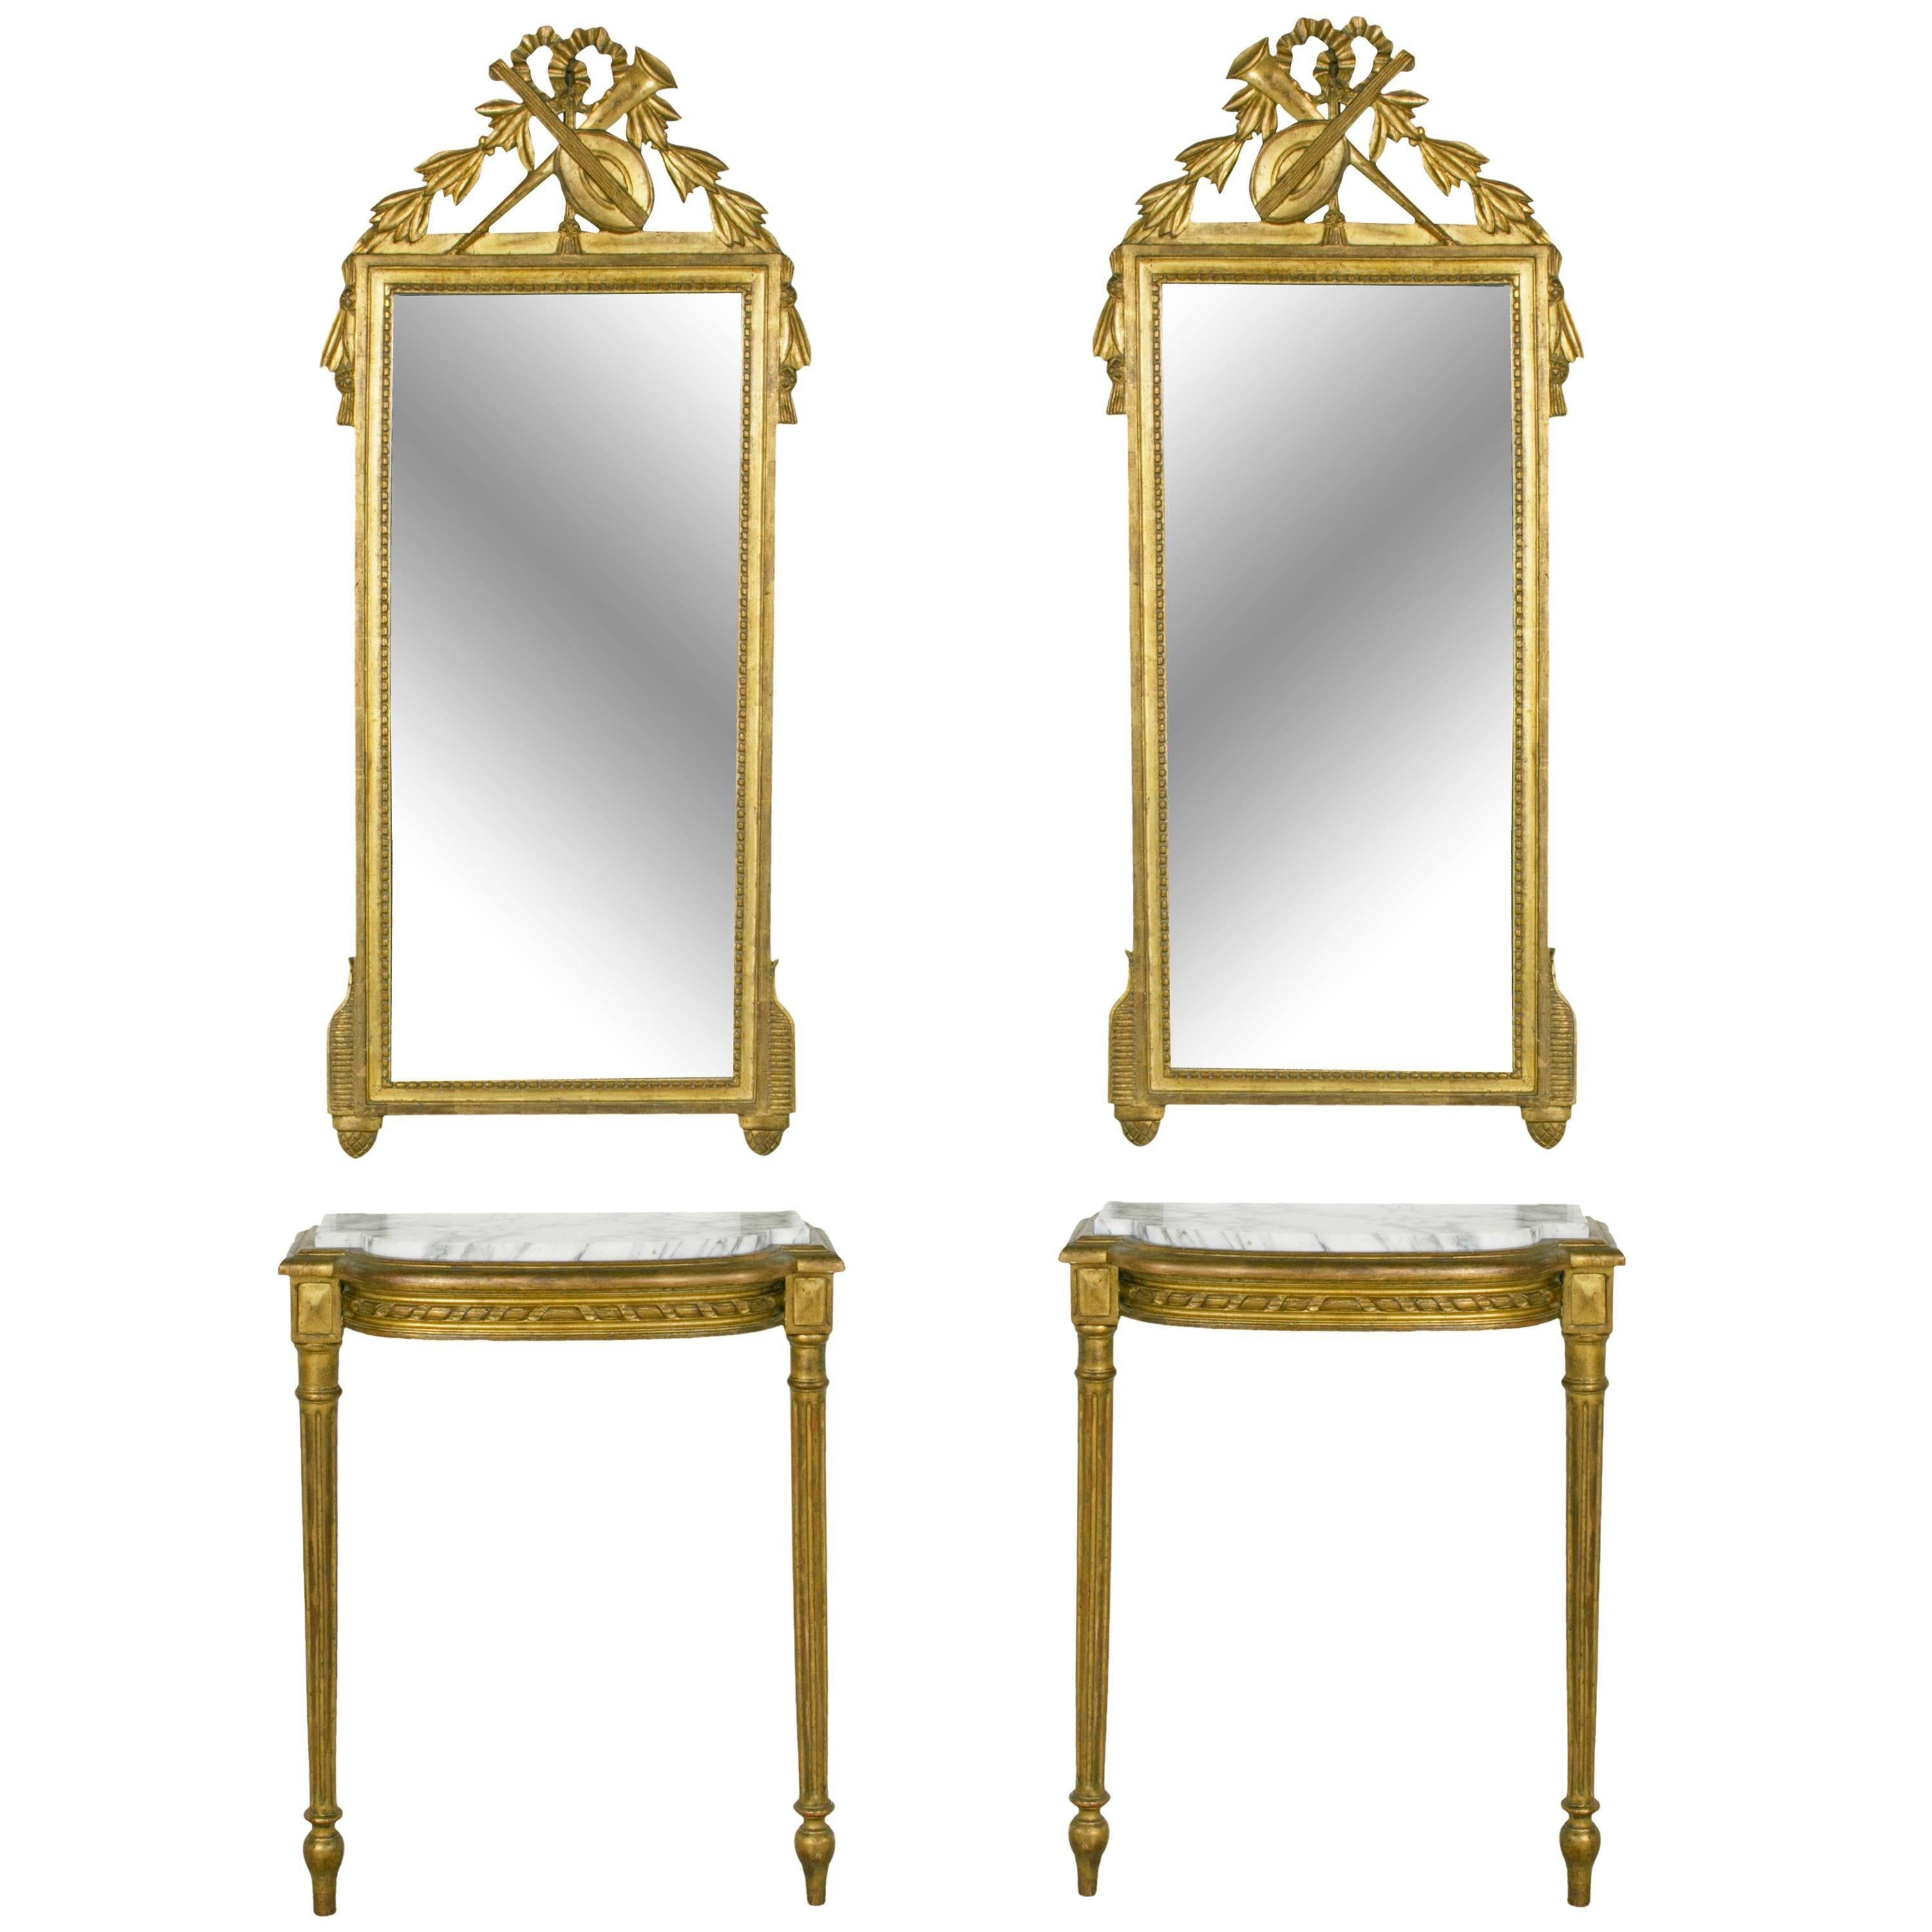 Tall Pair of Louis XVI Giltwood Mirrors and Consoles with White Marble